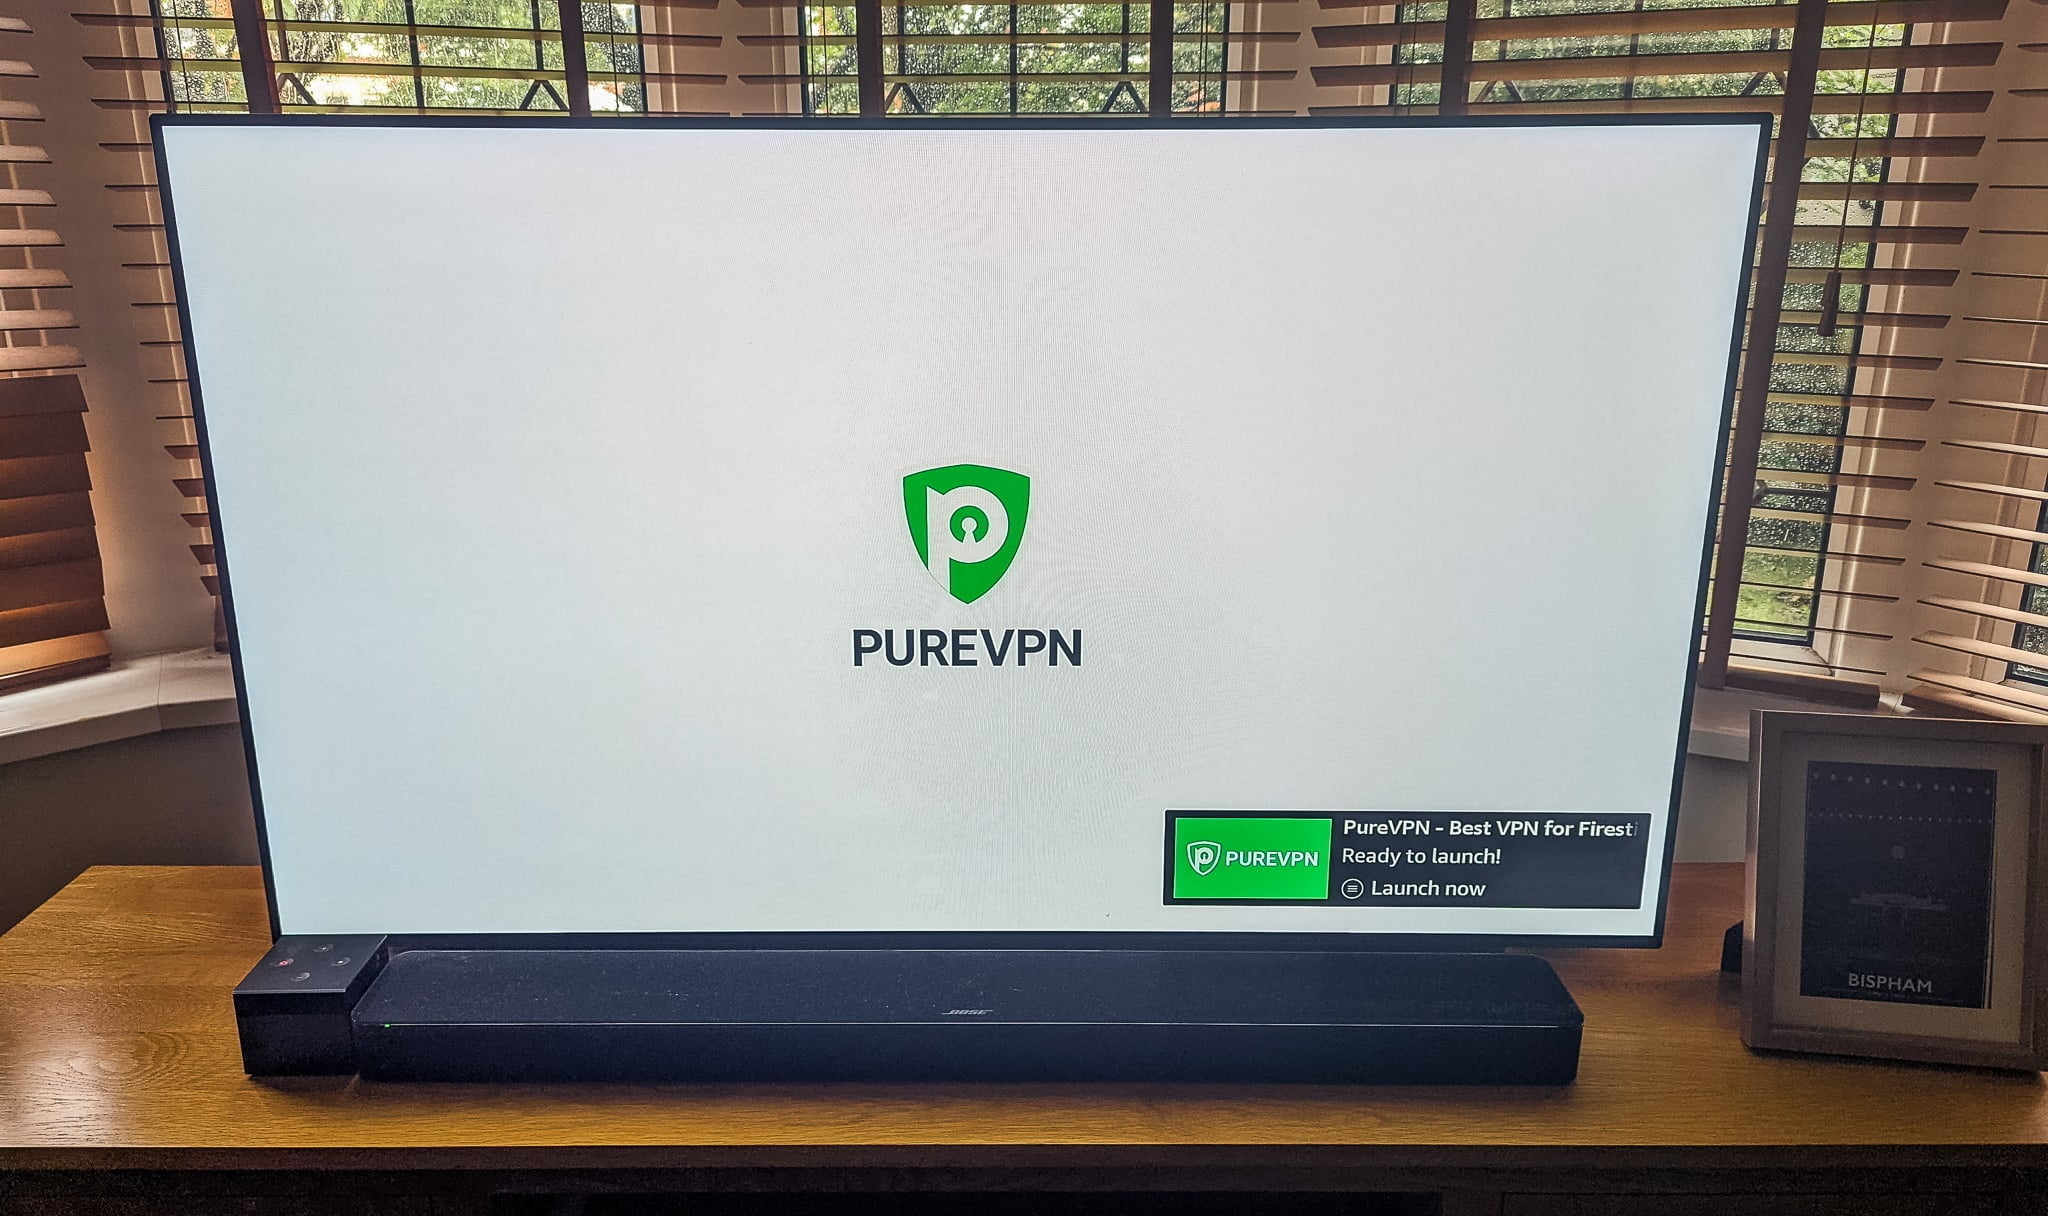 How to install a VPN on a Fire Stick